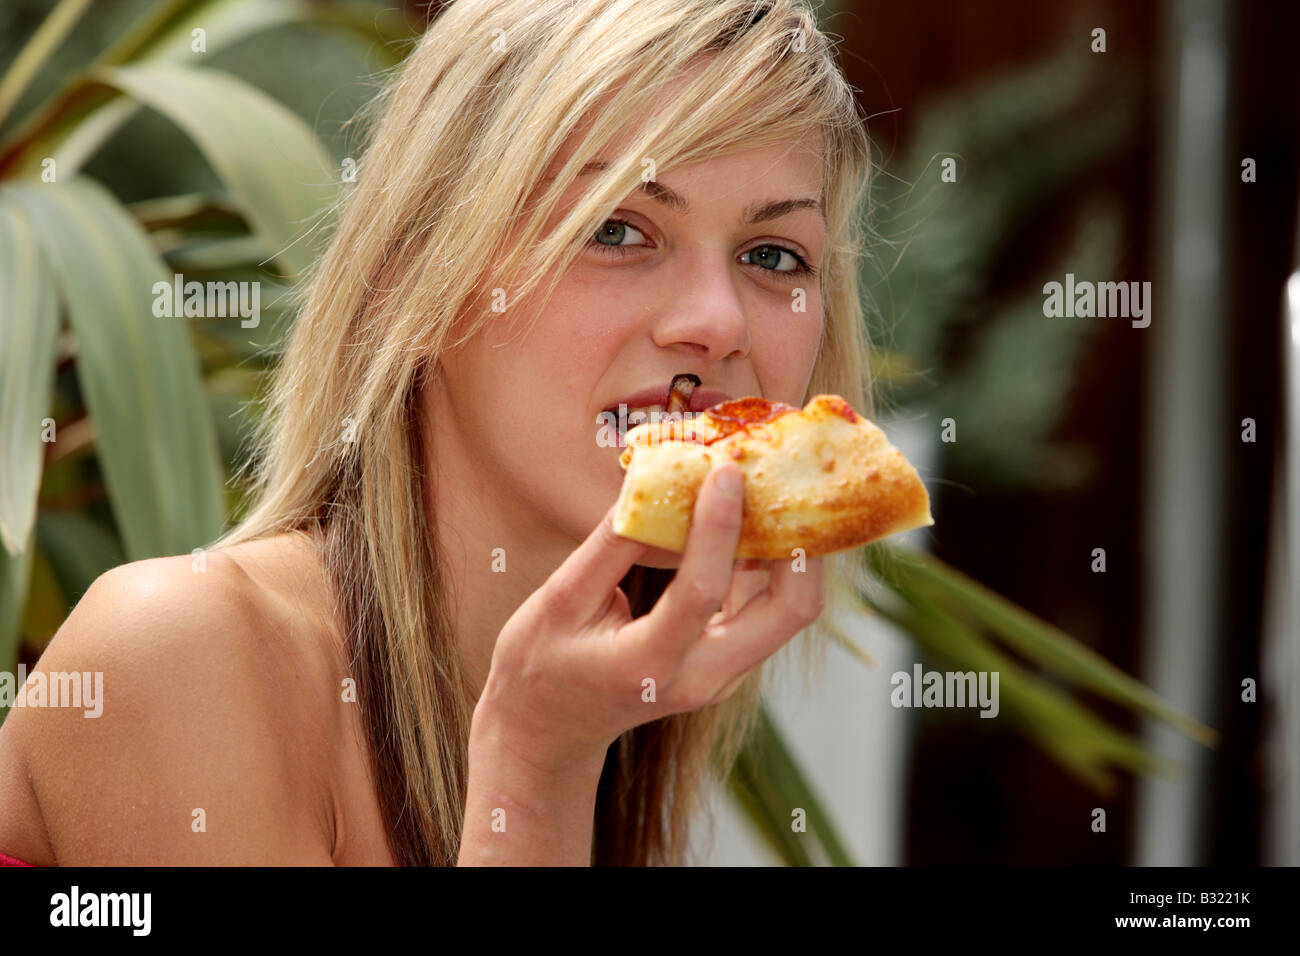 Young Woman Eating Pizza Model Released Stock Photo